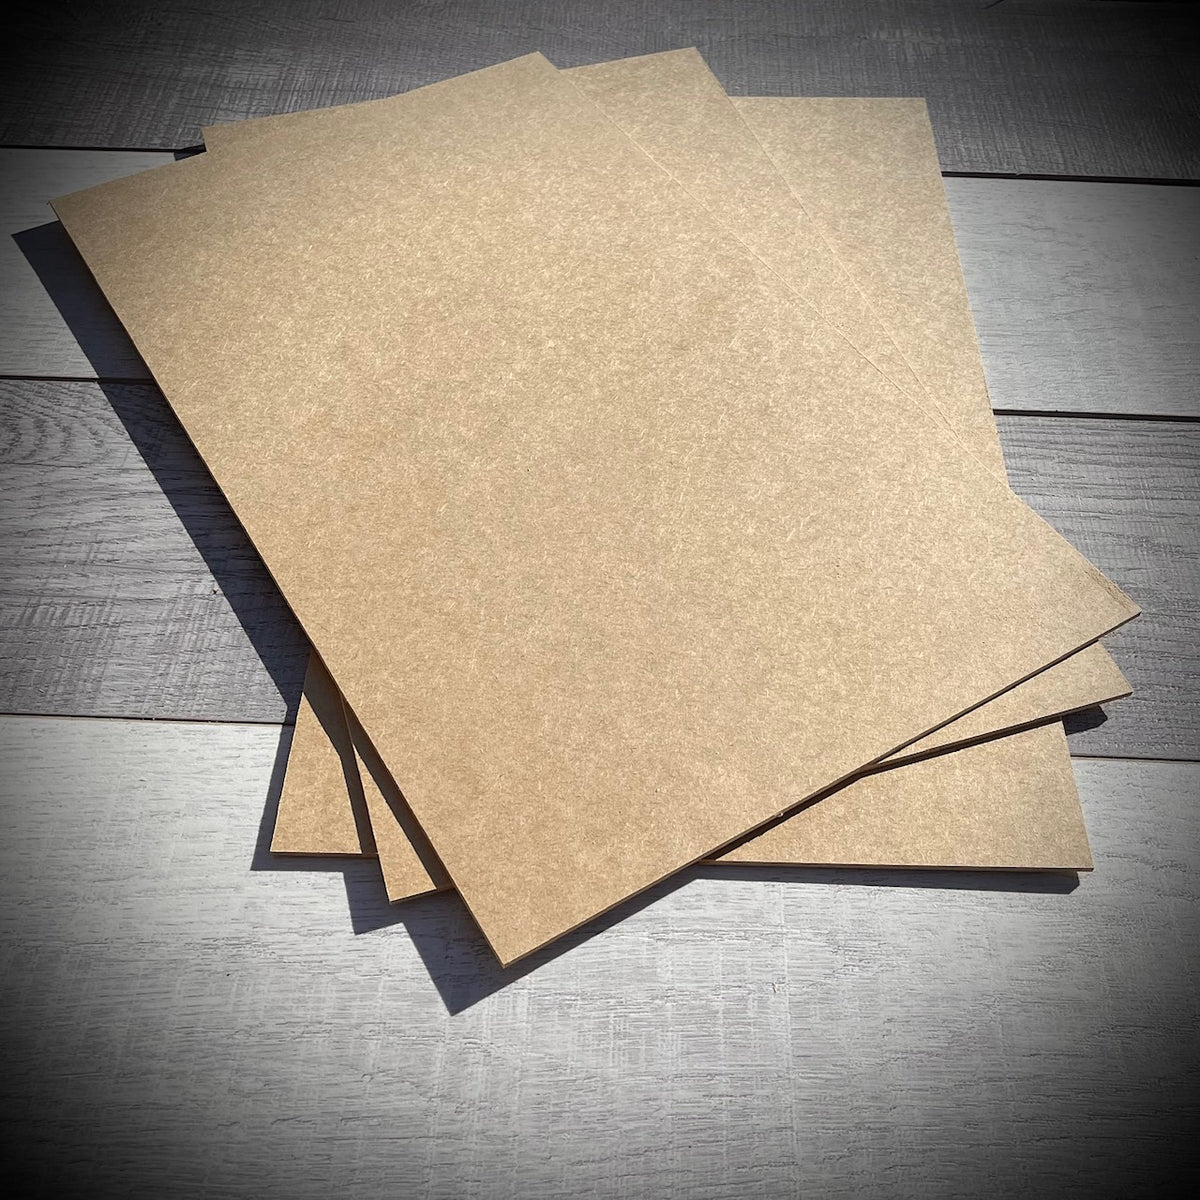 Di-Kraft Pine Mdf 5 Mm Thick Art And Craft Board With Light Colour And  Smooth Finish (Brown, 6 Inch X 6 Inch X 5 Mm) - Pack Of 6 